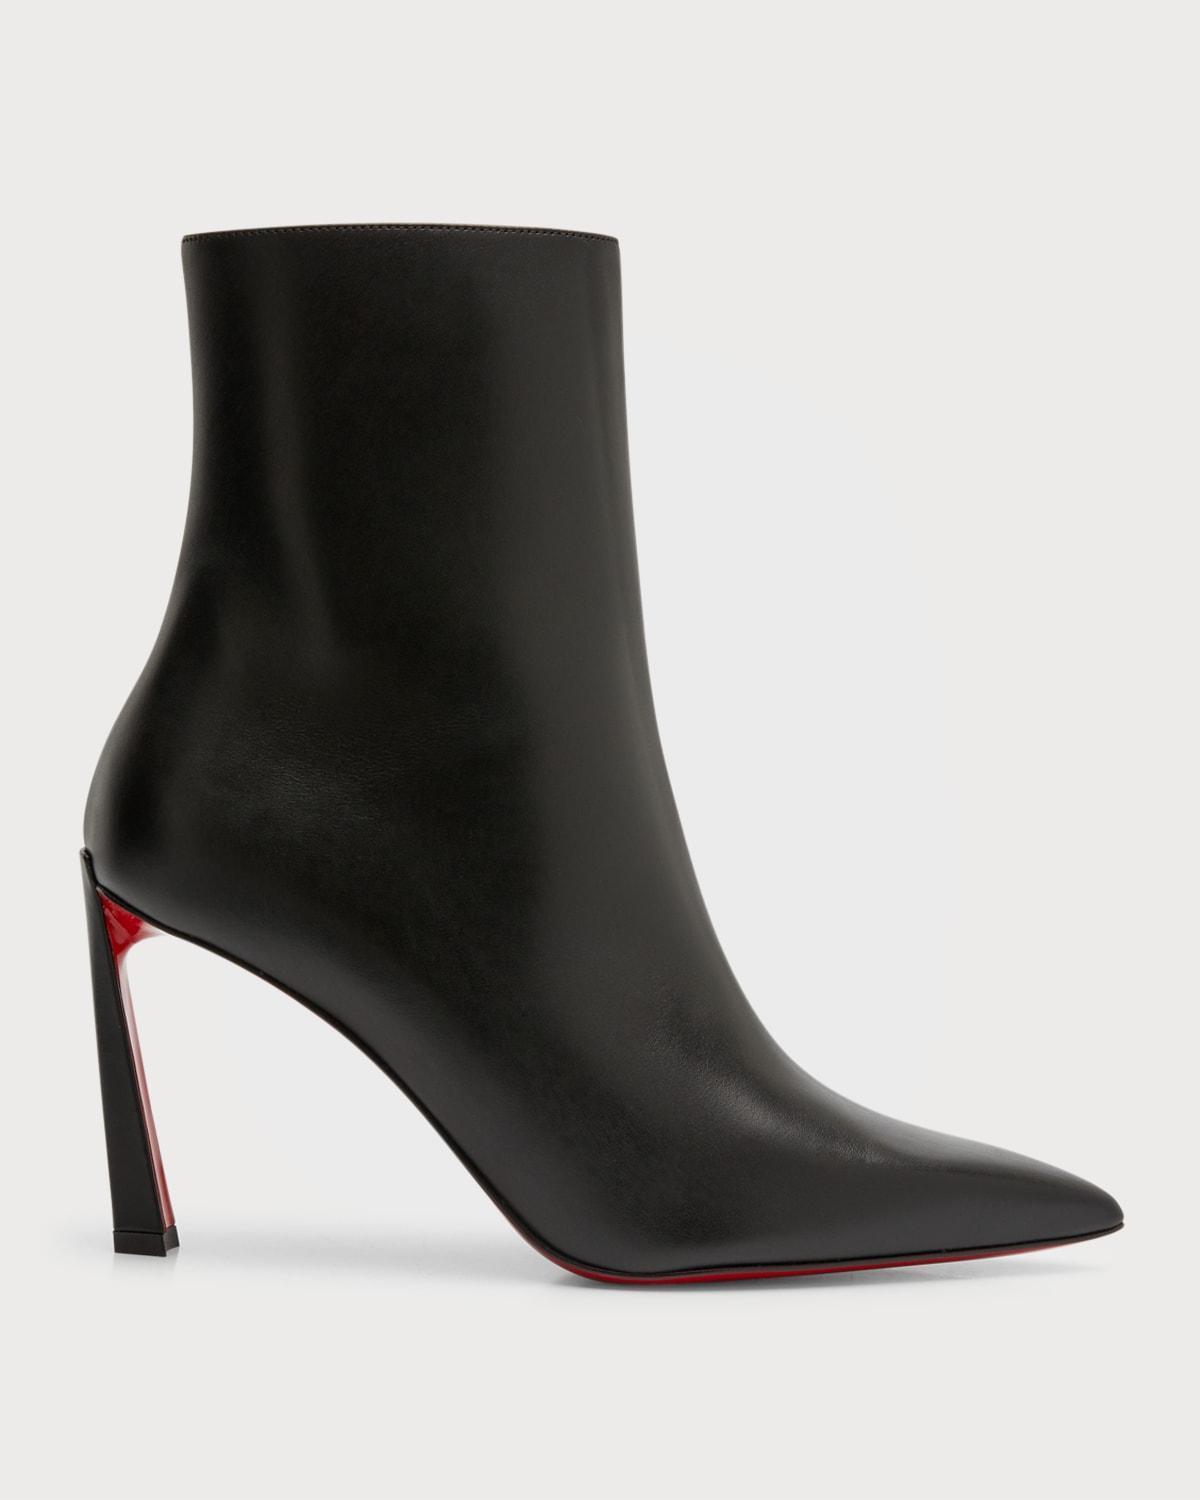 Christian Louboutin Condora Pointed Toe Bootie Product Image